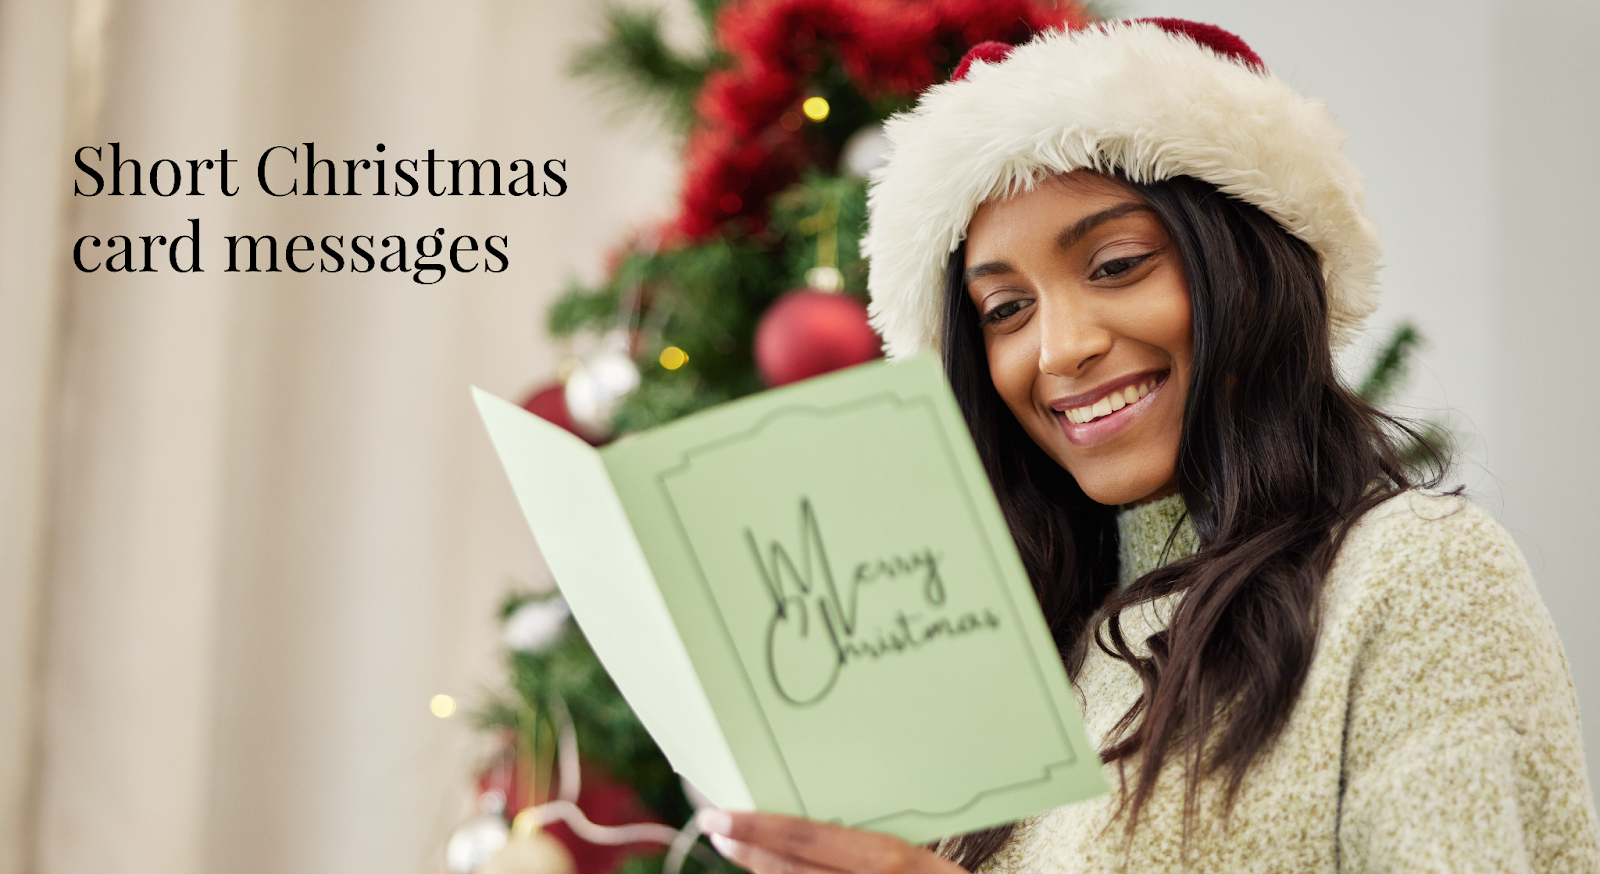 A woman reading a Christmas card with the text “short Christmas card messages”